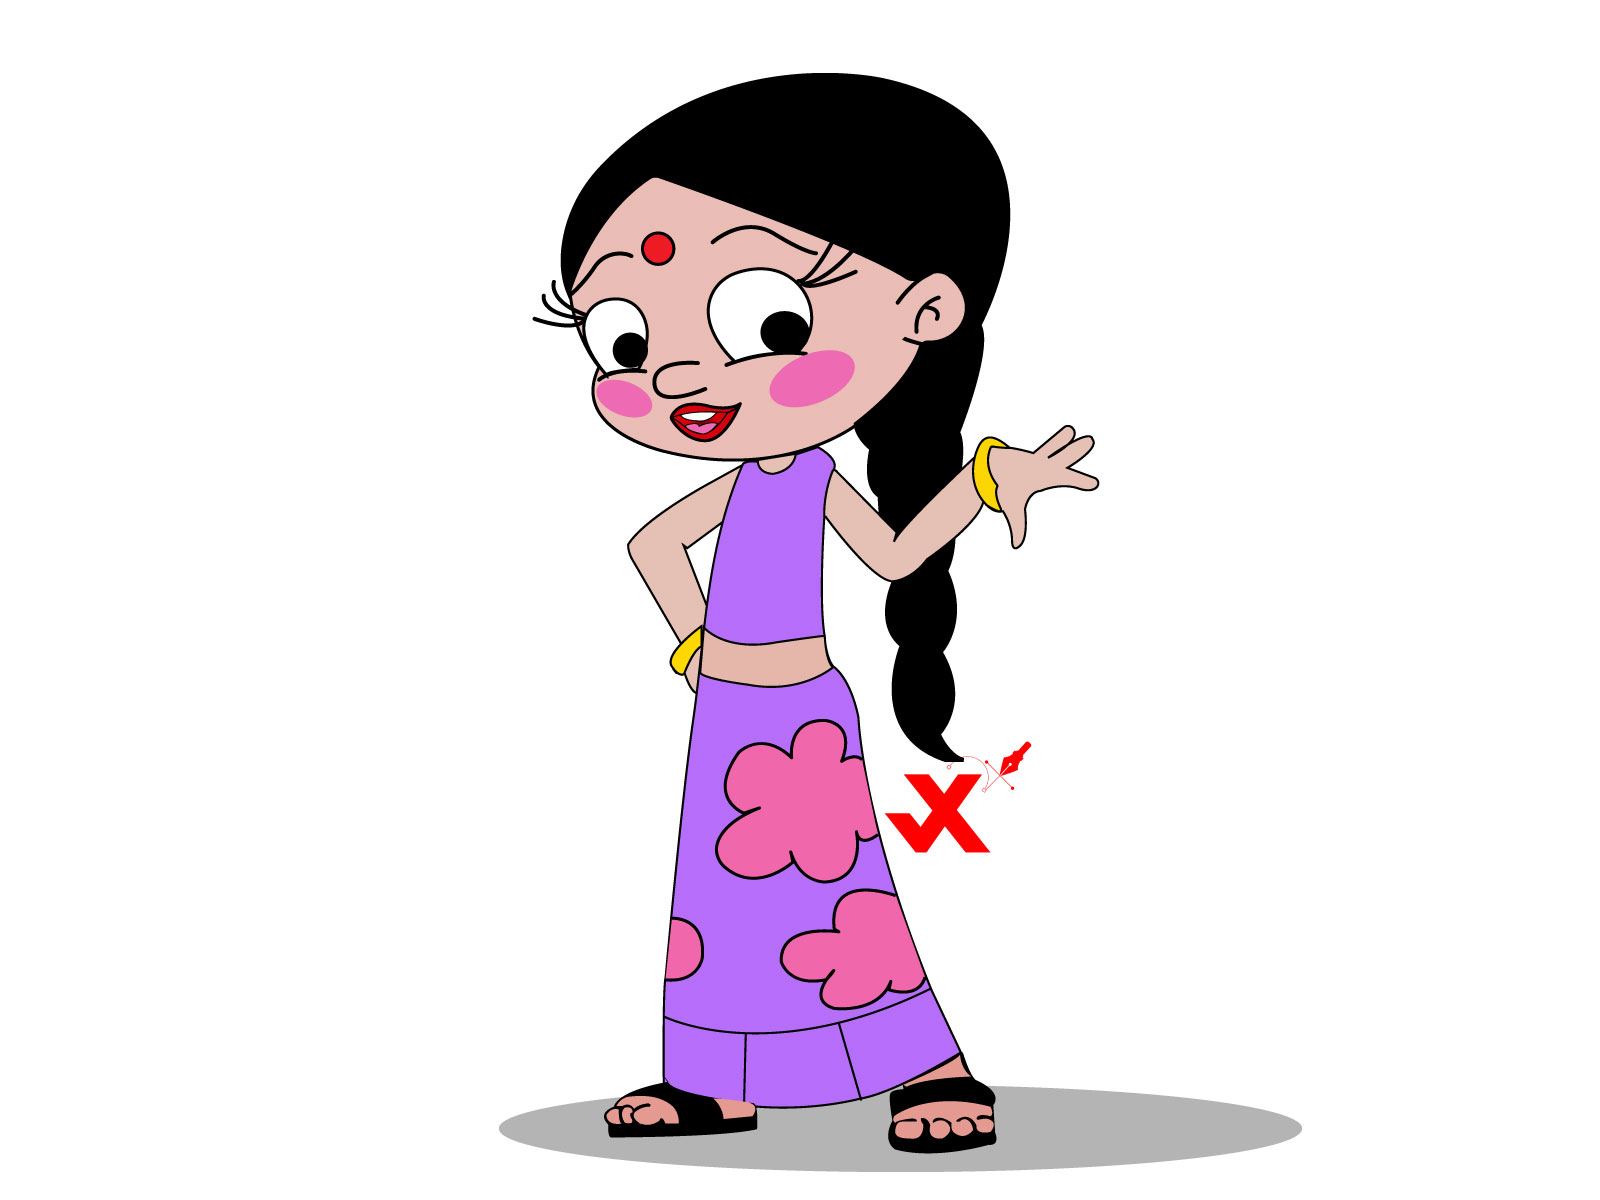 Chotta Bheem Coloring Pages. 55 Images Free Printable